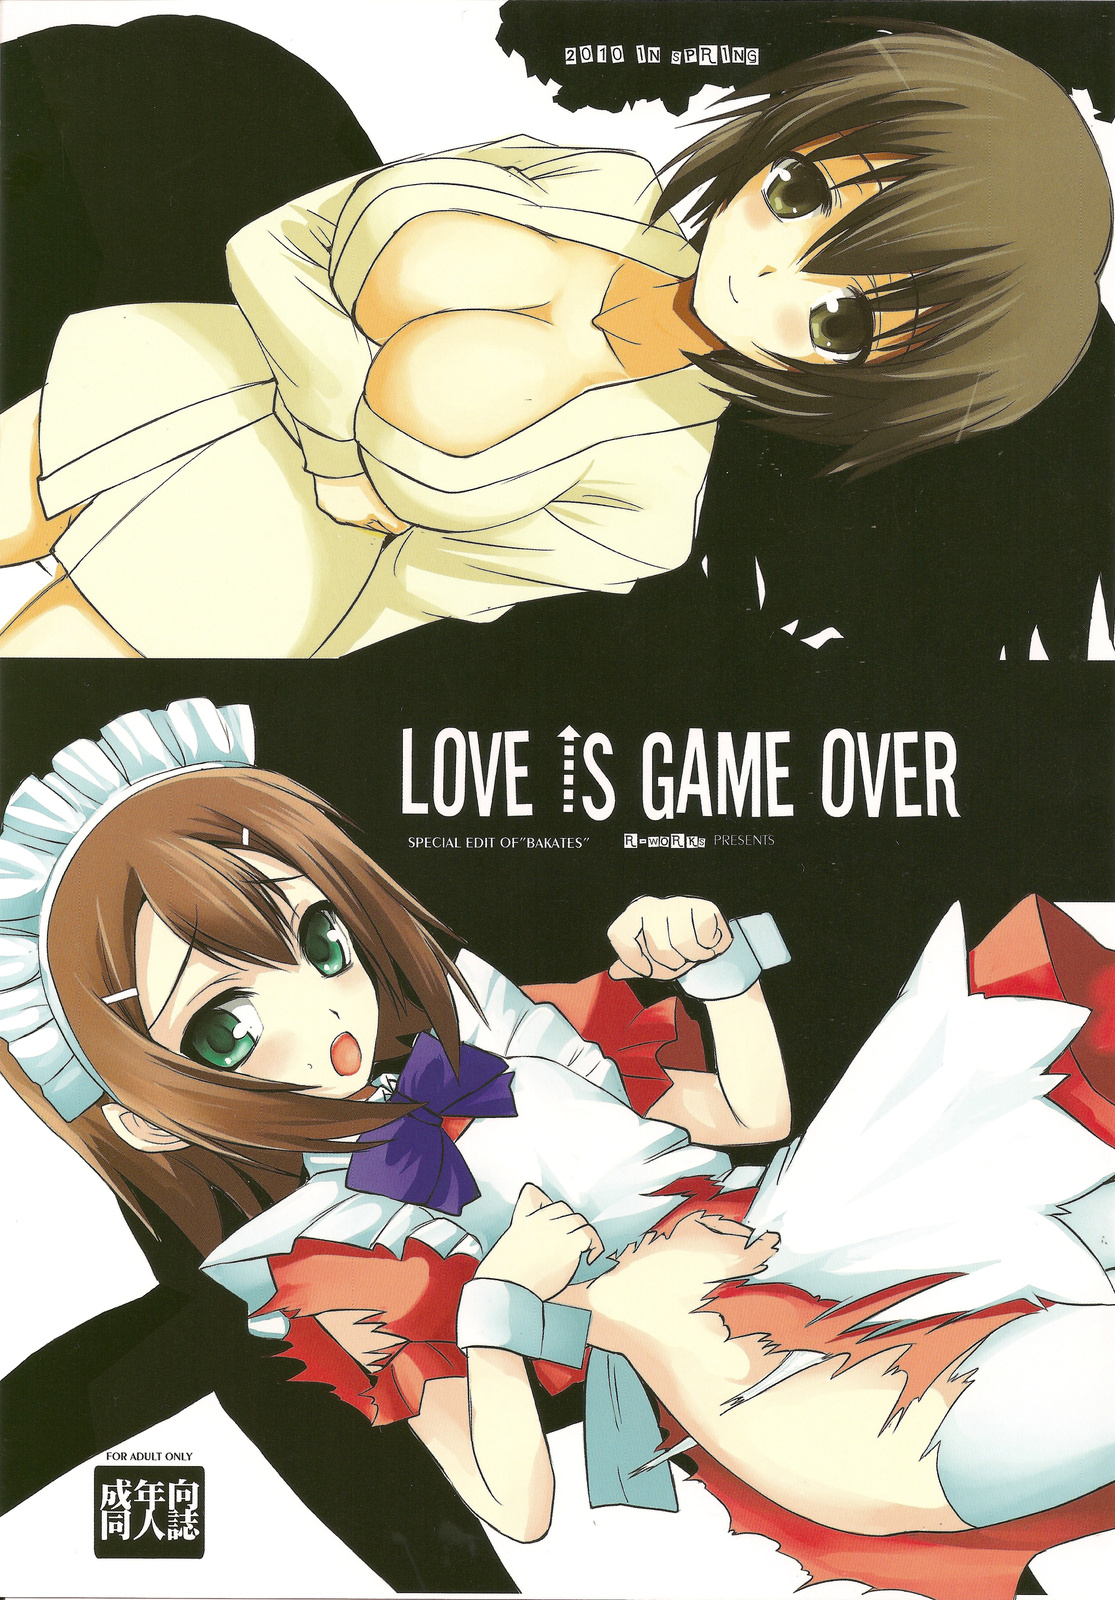 (COMIC1☆4) [R-WORKS] LOVE IS GAME OVER (Baka to Test to Shoukanjuu) page 1 full